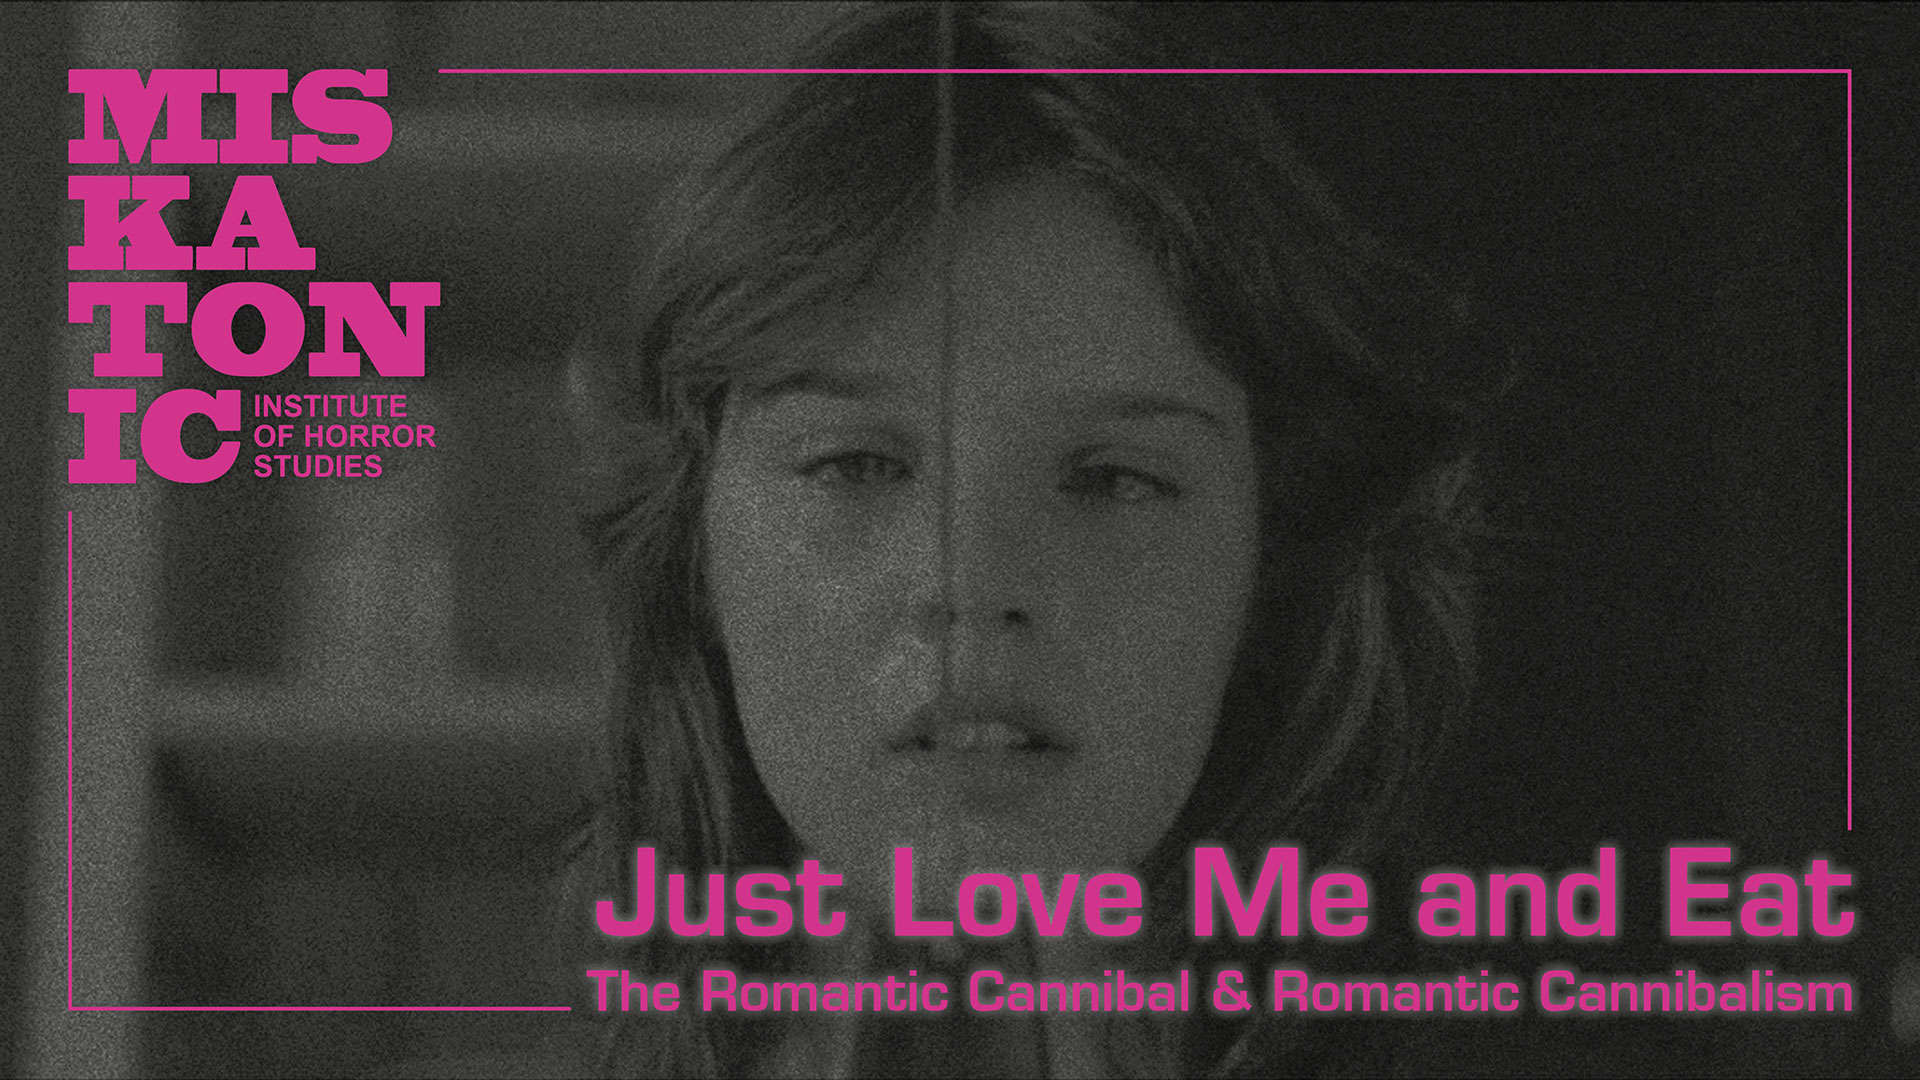 "Just Love Me and Eat": The Romantic Cannibal and Romantic Cannibalism (London)